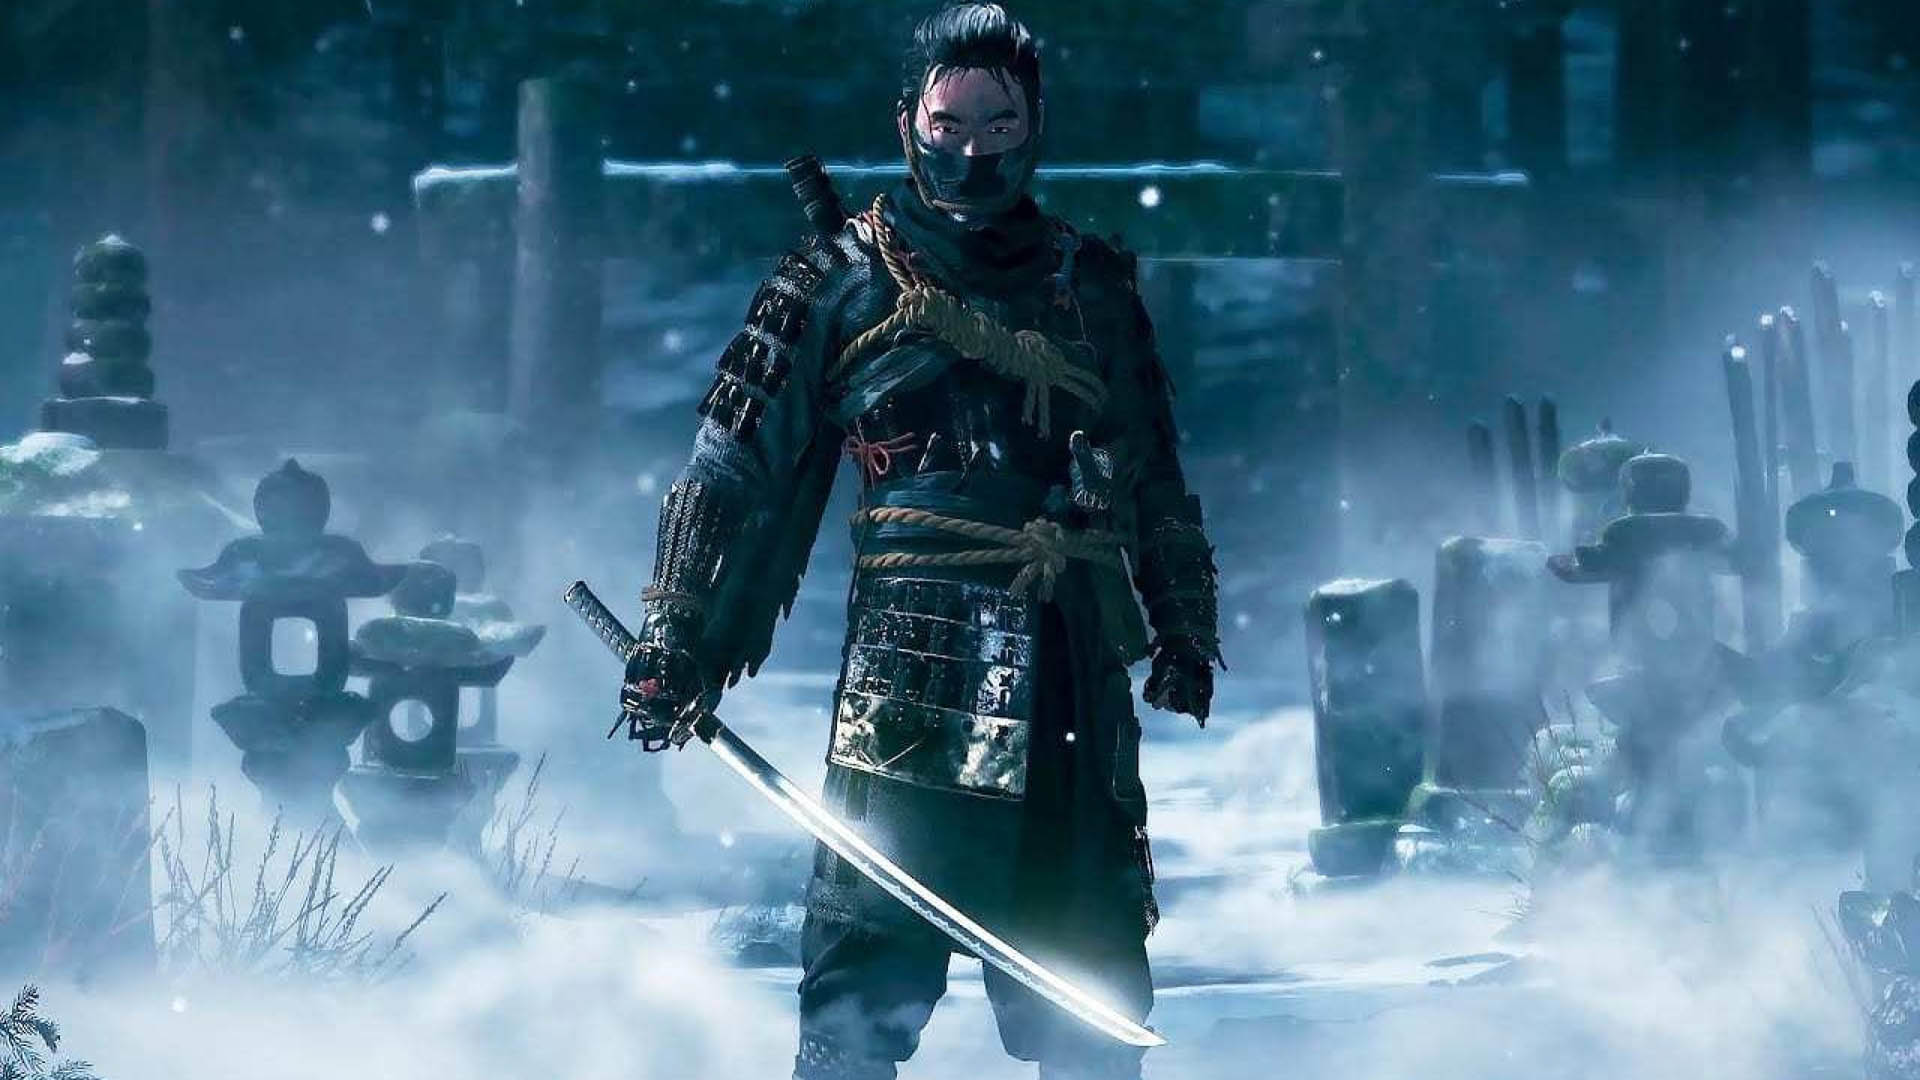 Ghost Of Tsushima Surprised Sony With Its Critical And Commercial Performance, According To PlayStation CEO